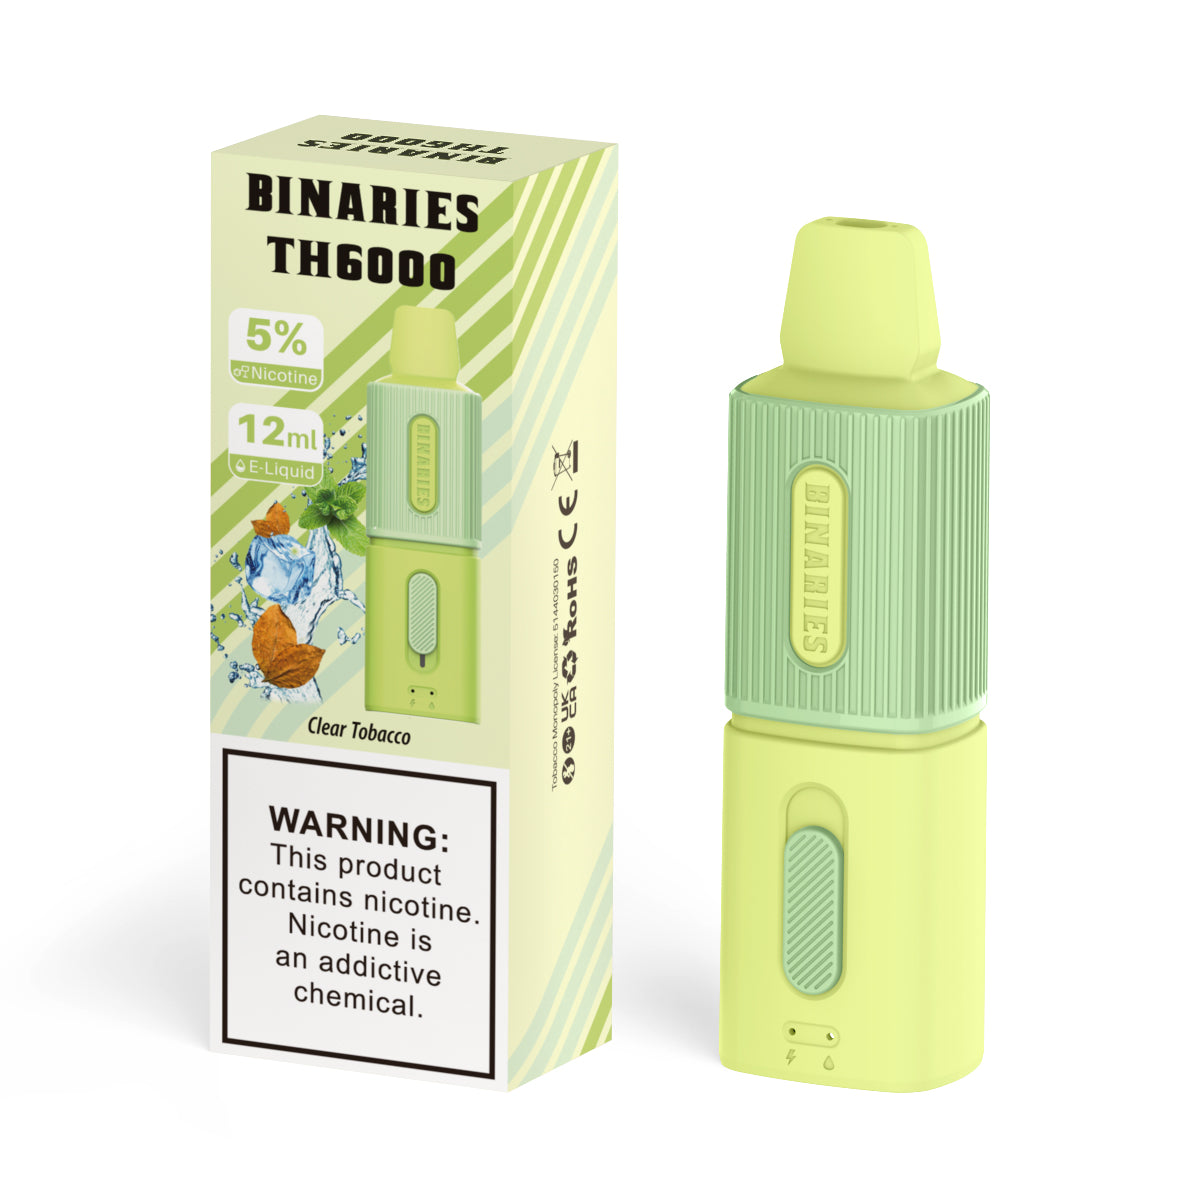 Binaries Cabin Disposable TH | 6000 Puffs | 12mL | 50mg Clear Tobacco with Packaging